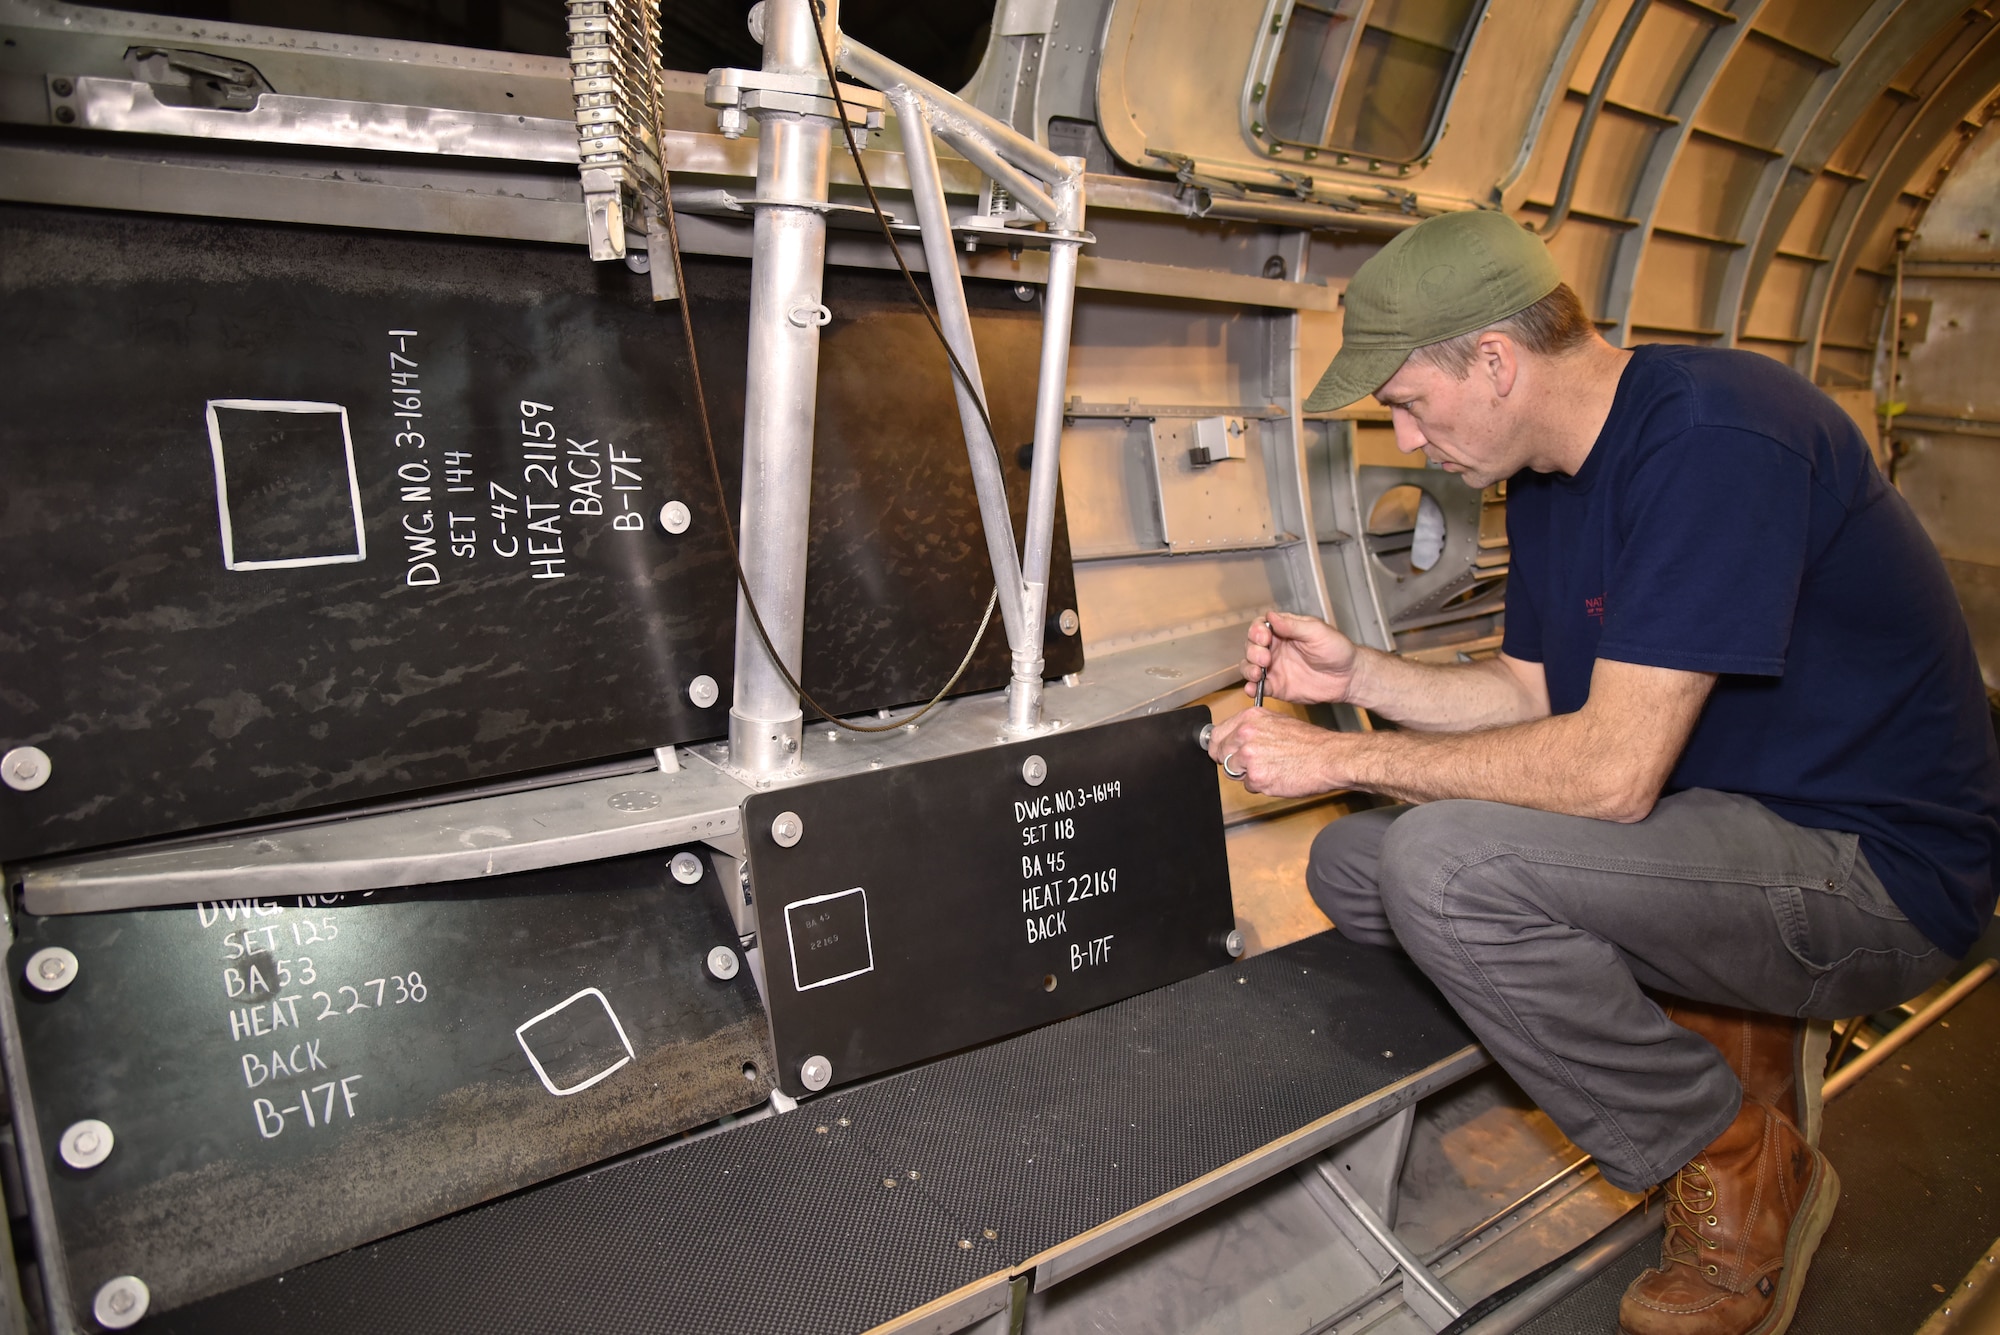 DAYTON, Ohio -- Museum restoration specialist Chad Vanhook works on the waist gun section of the Boeing B-17F Memphis Belle at the National Museum of the U.S. Air Force on June 3, 2019. (U.S. Air Force photo by Ken LaRock)